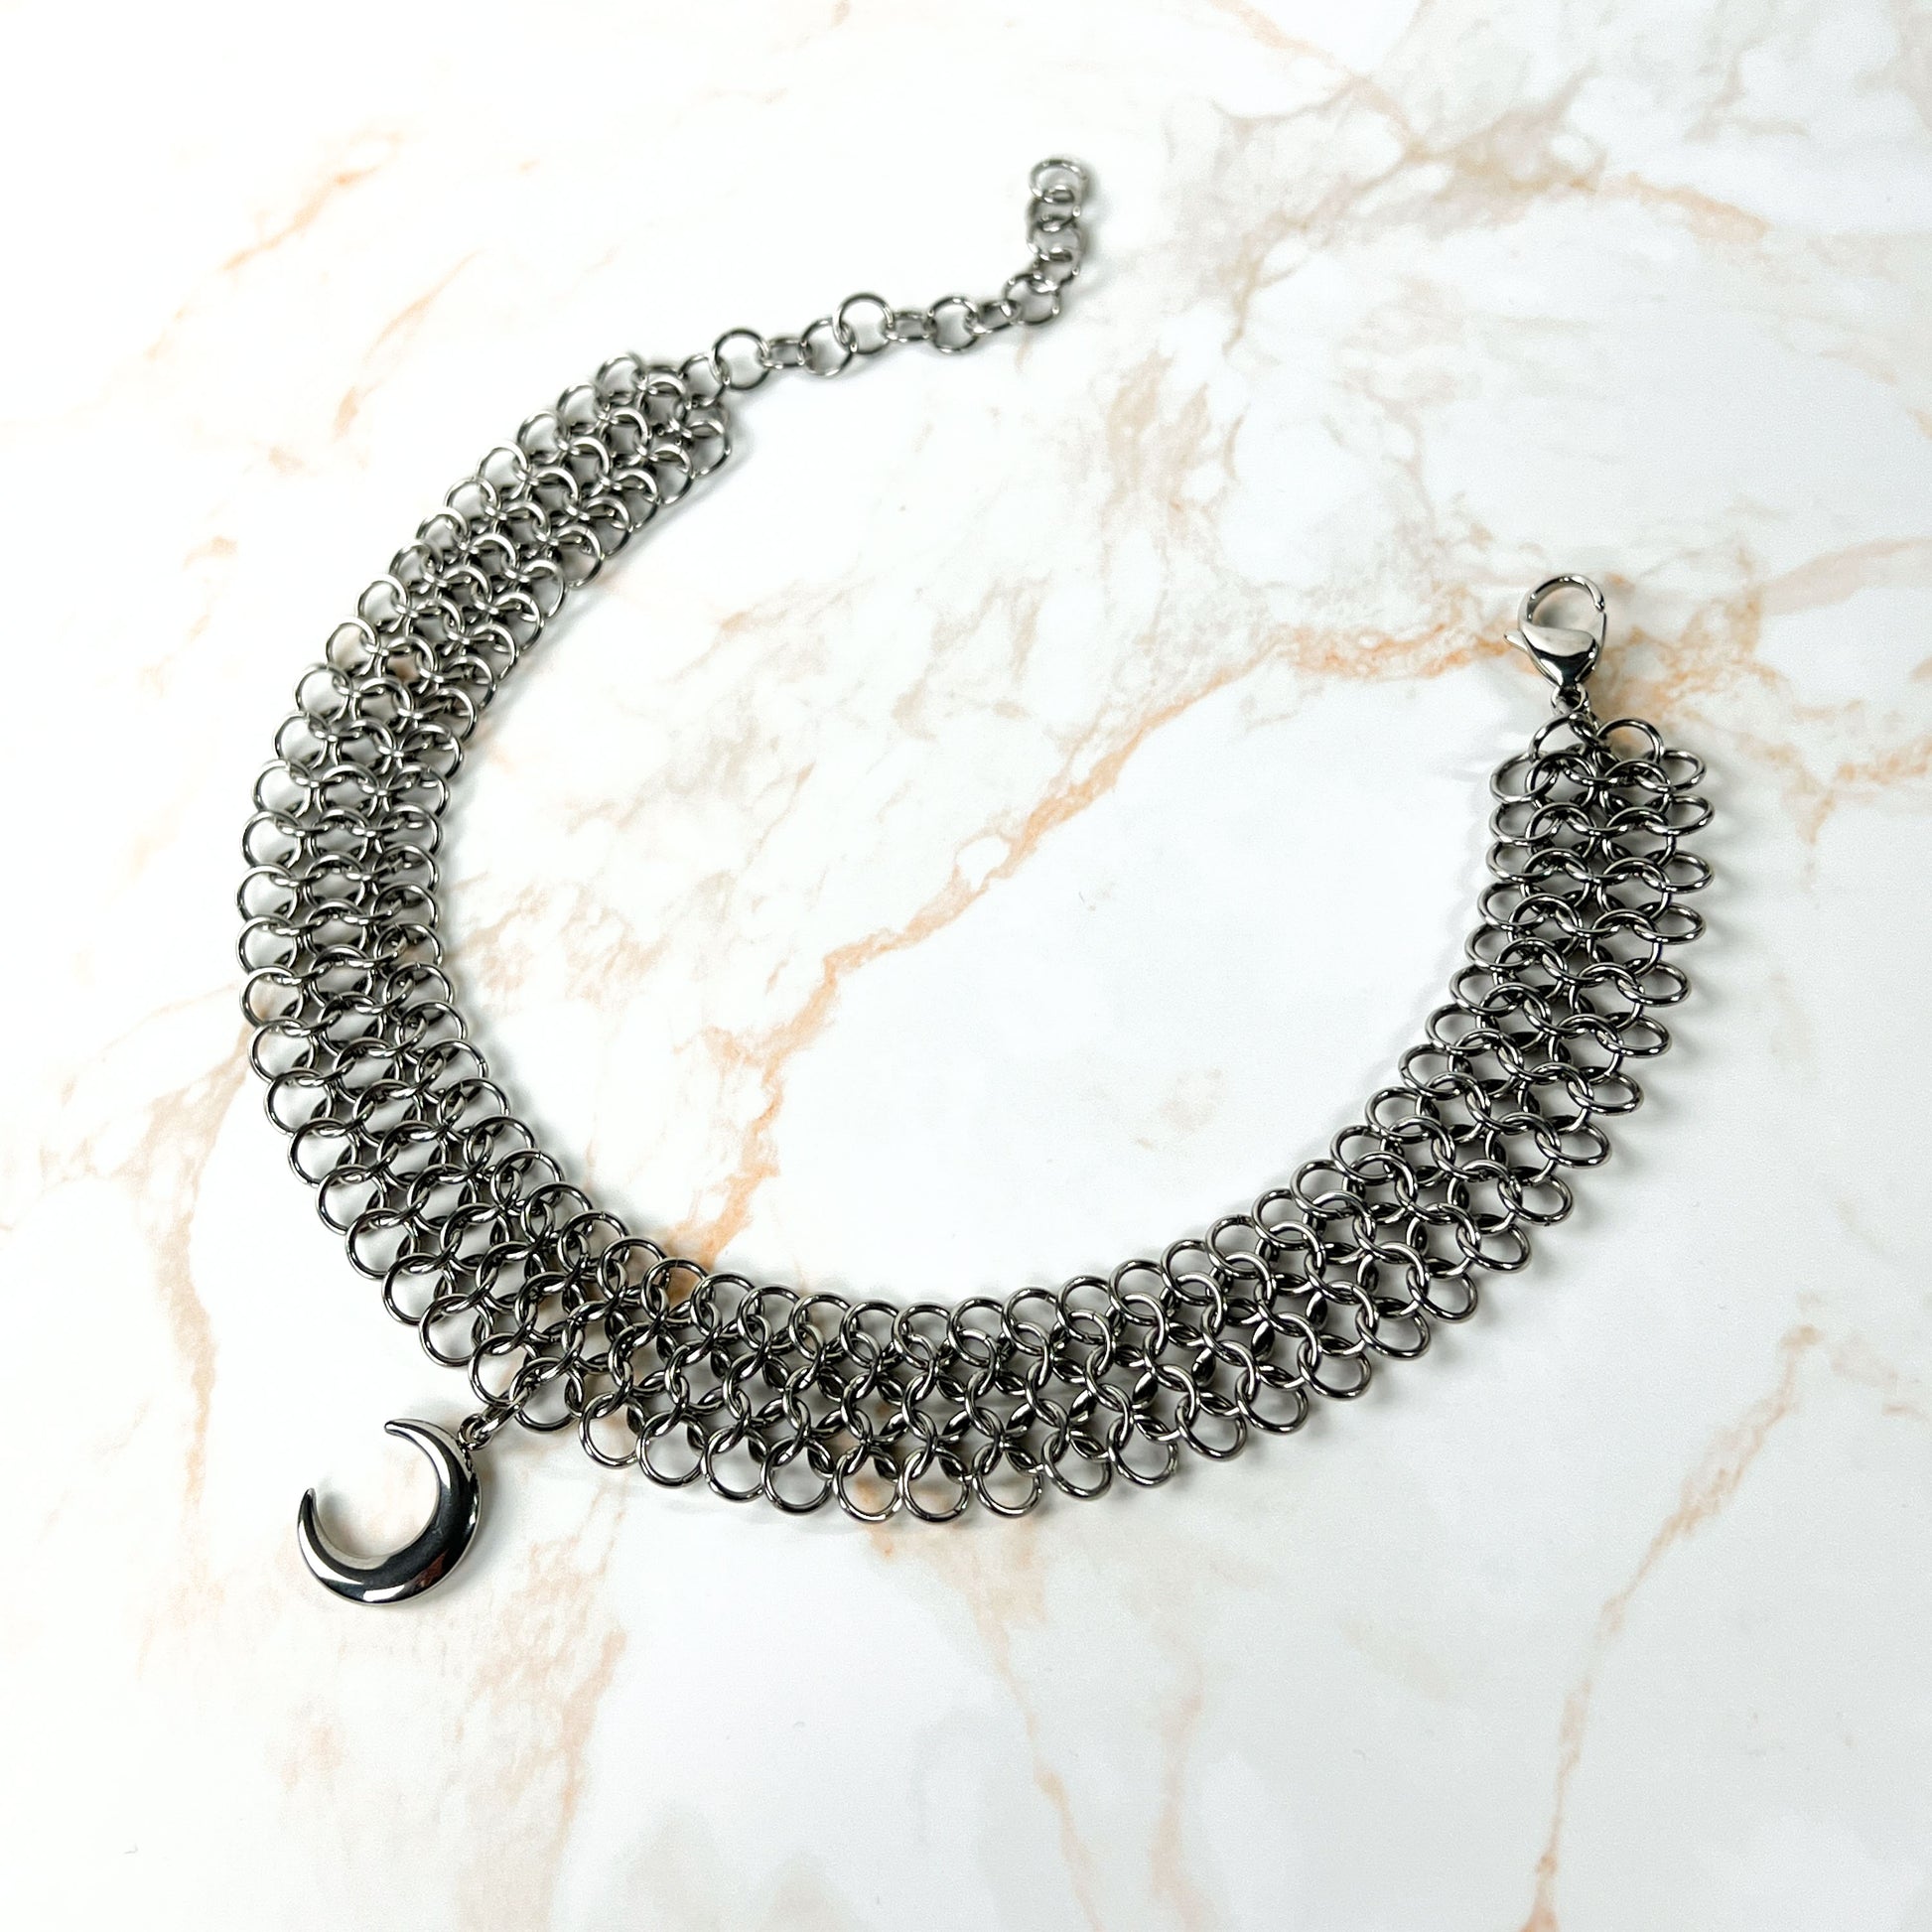 Moon crescent chainmail choker European 4 in 1 stainless steel necklace Baguette Magick